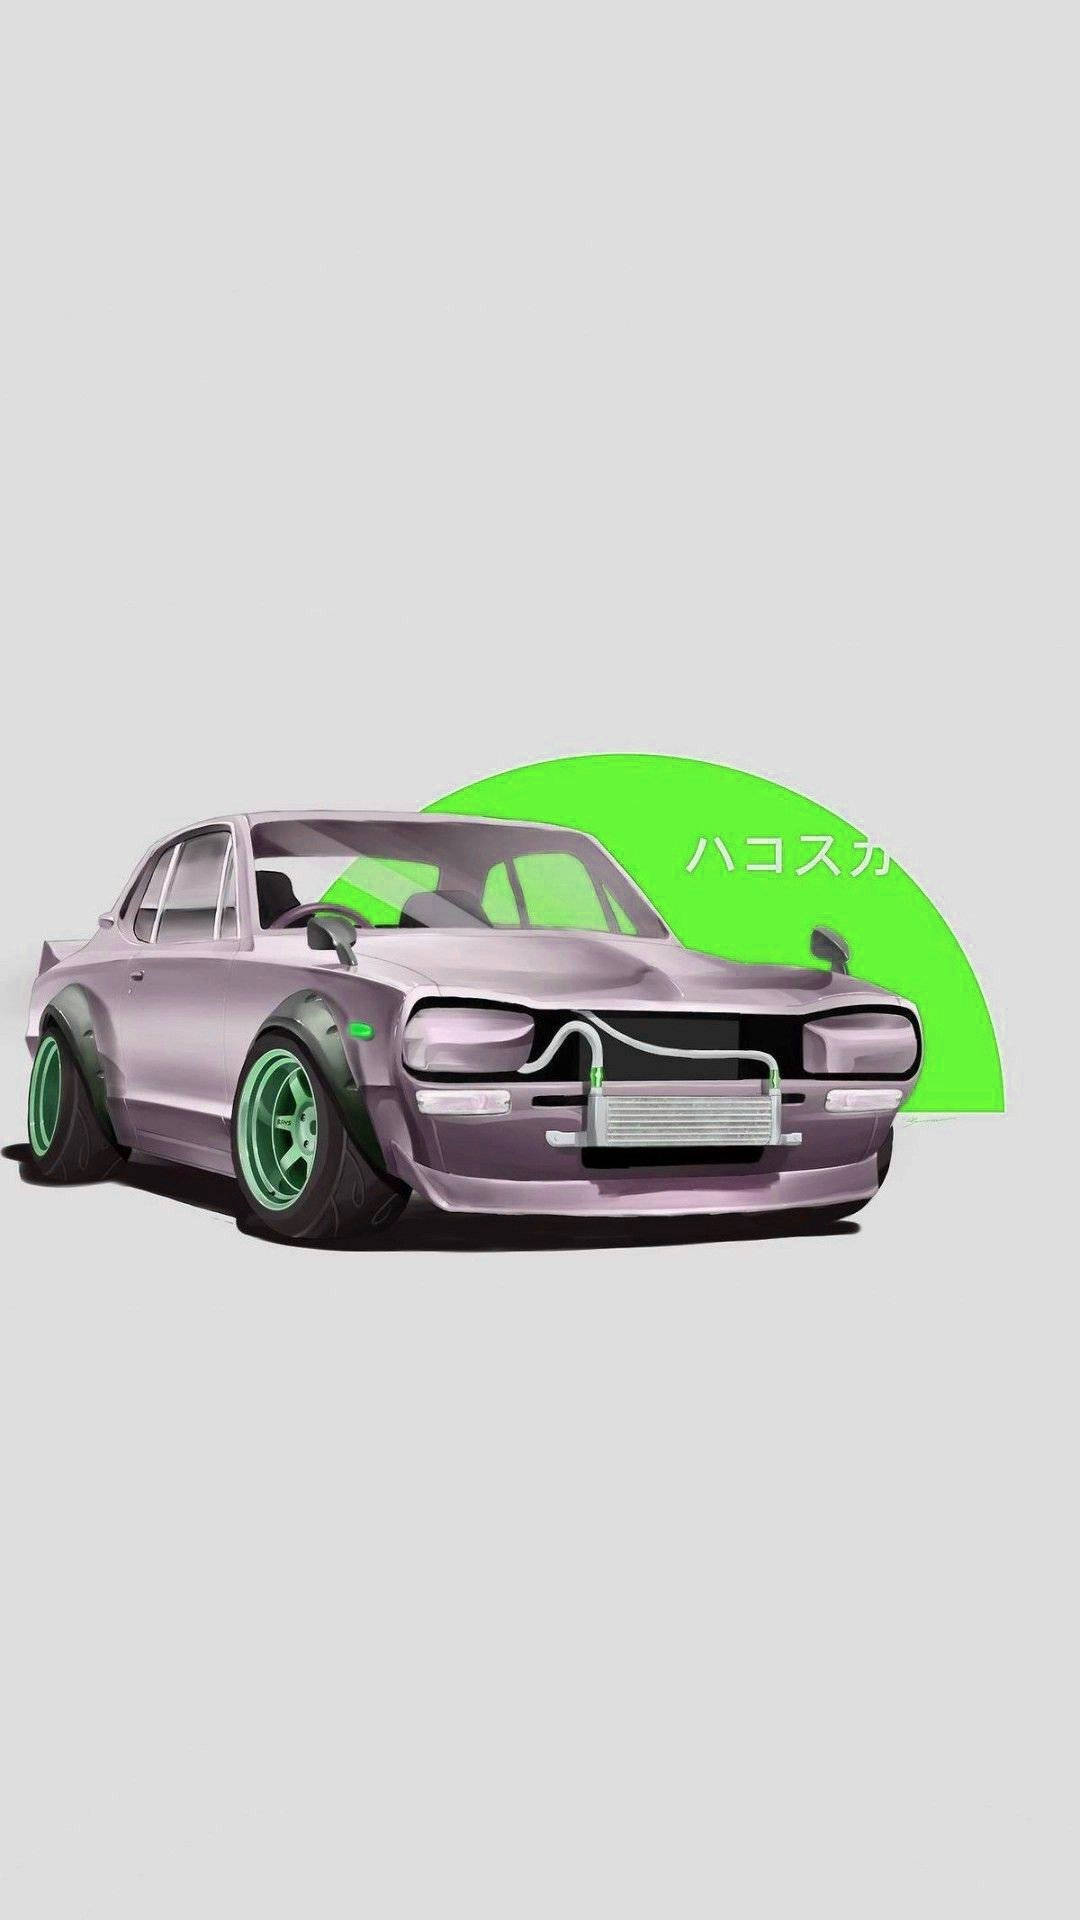 Jdm Car With Neon Green Sunset Wallpaper